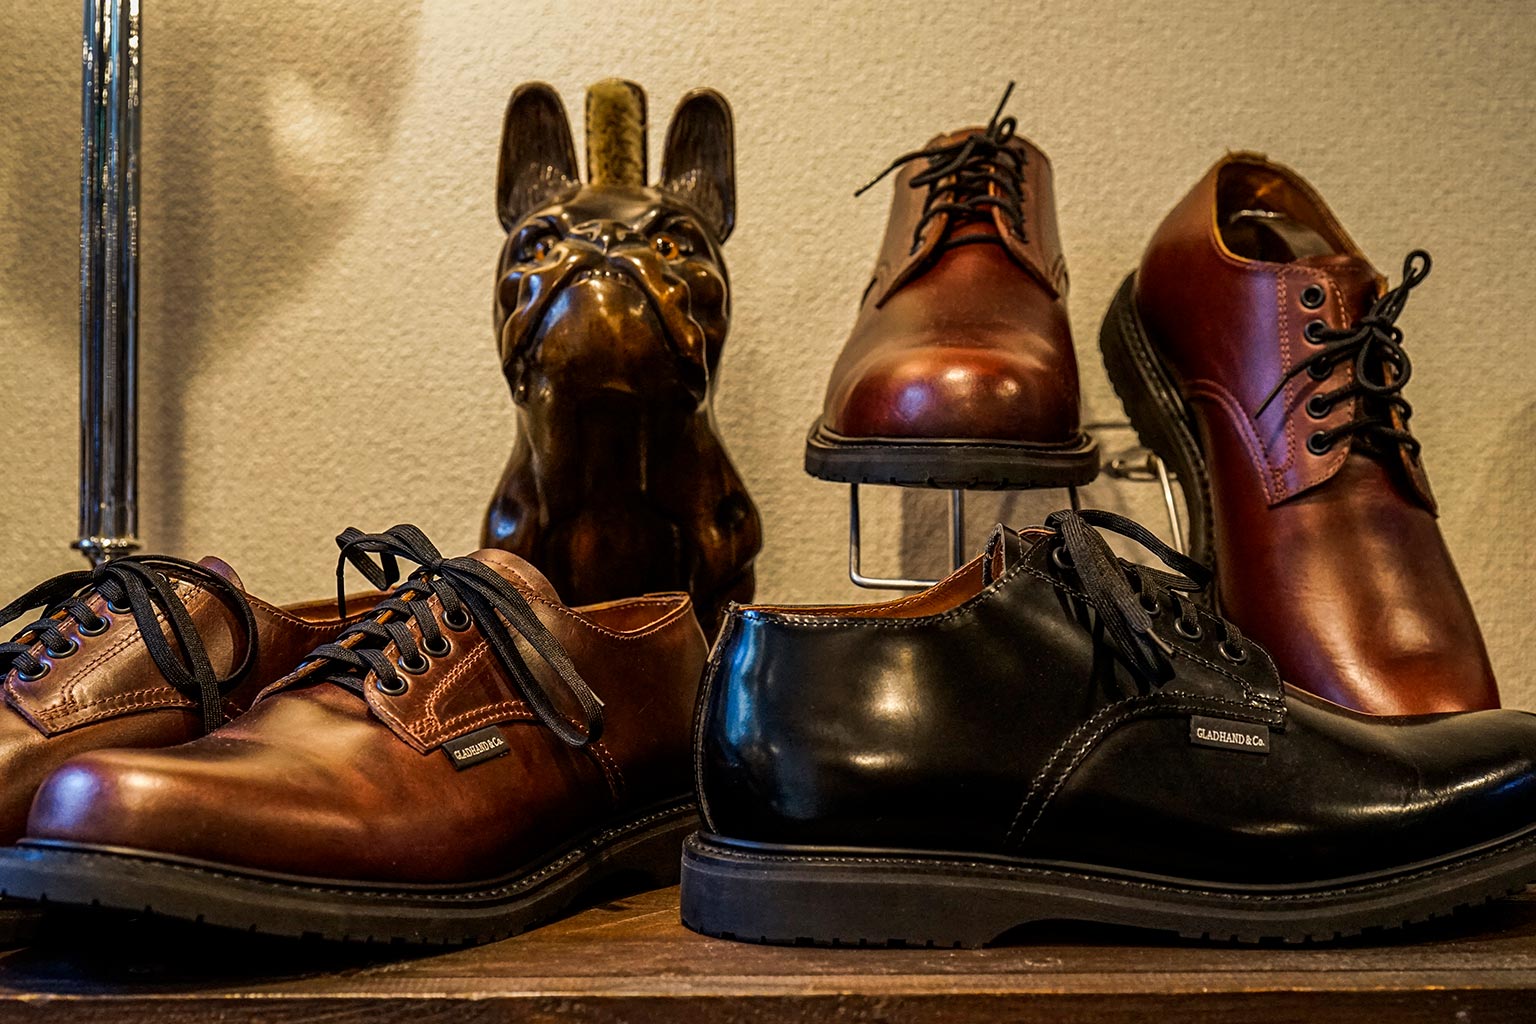 USA BOOTS – GLADHAND & Co.